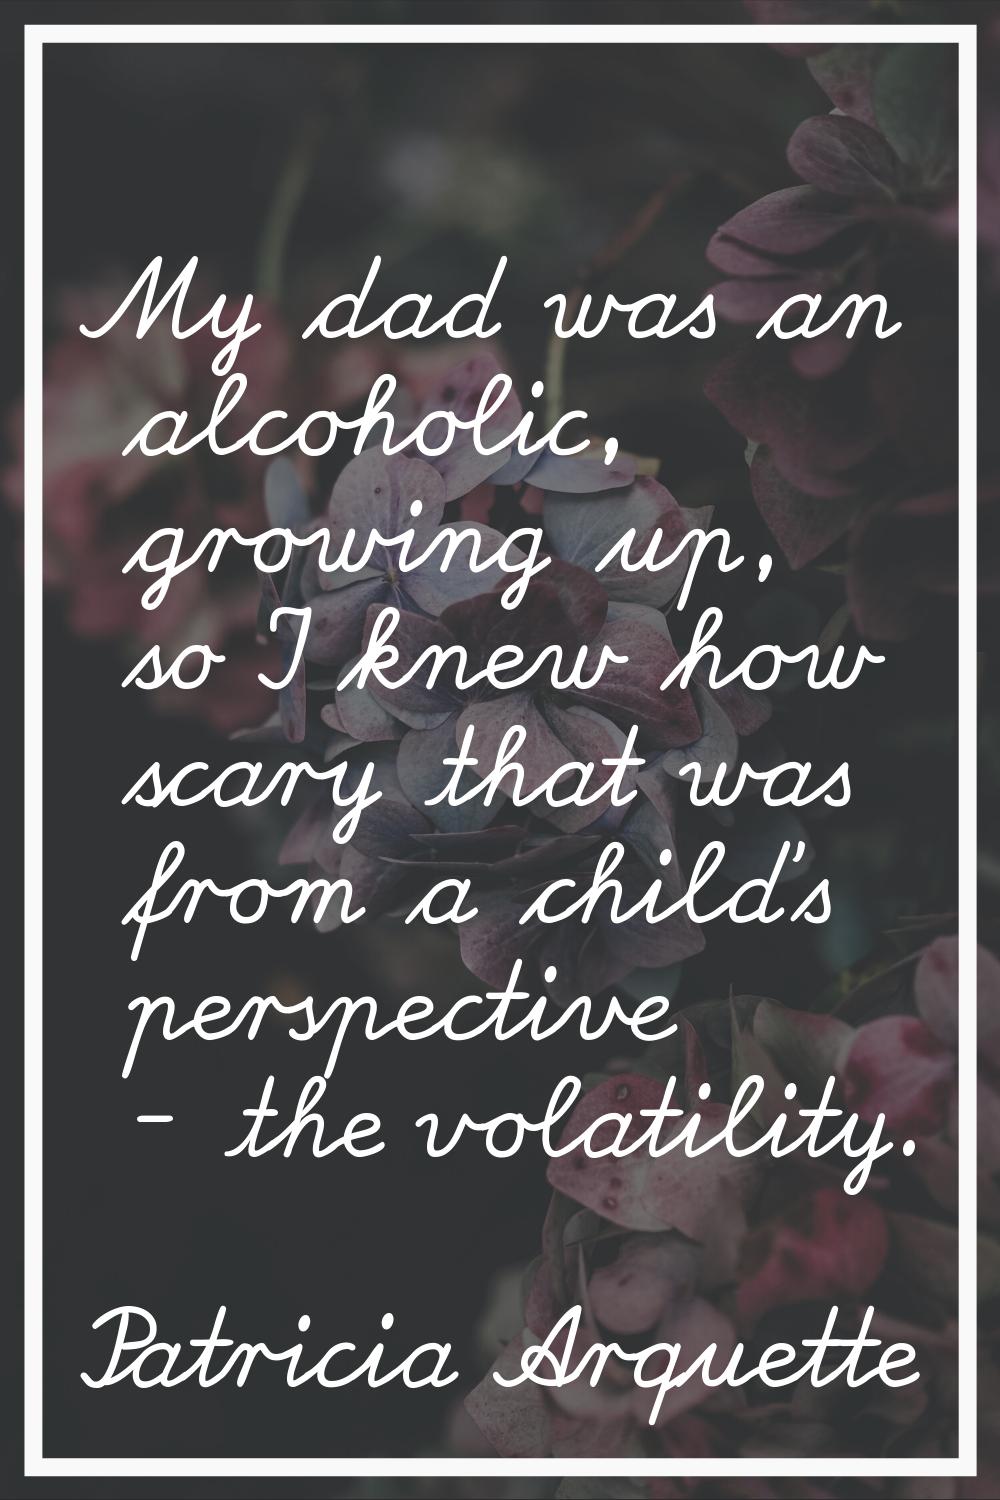 My dad was an alcoholic, growing up, so I knew how scary that was from a child's perspective - the 